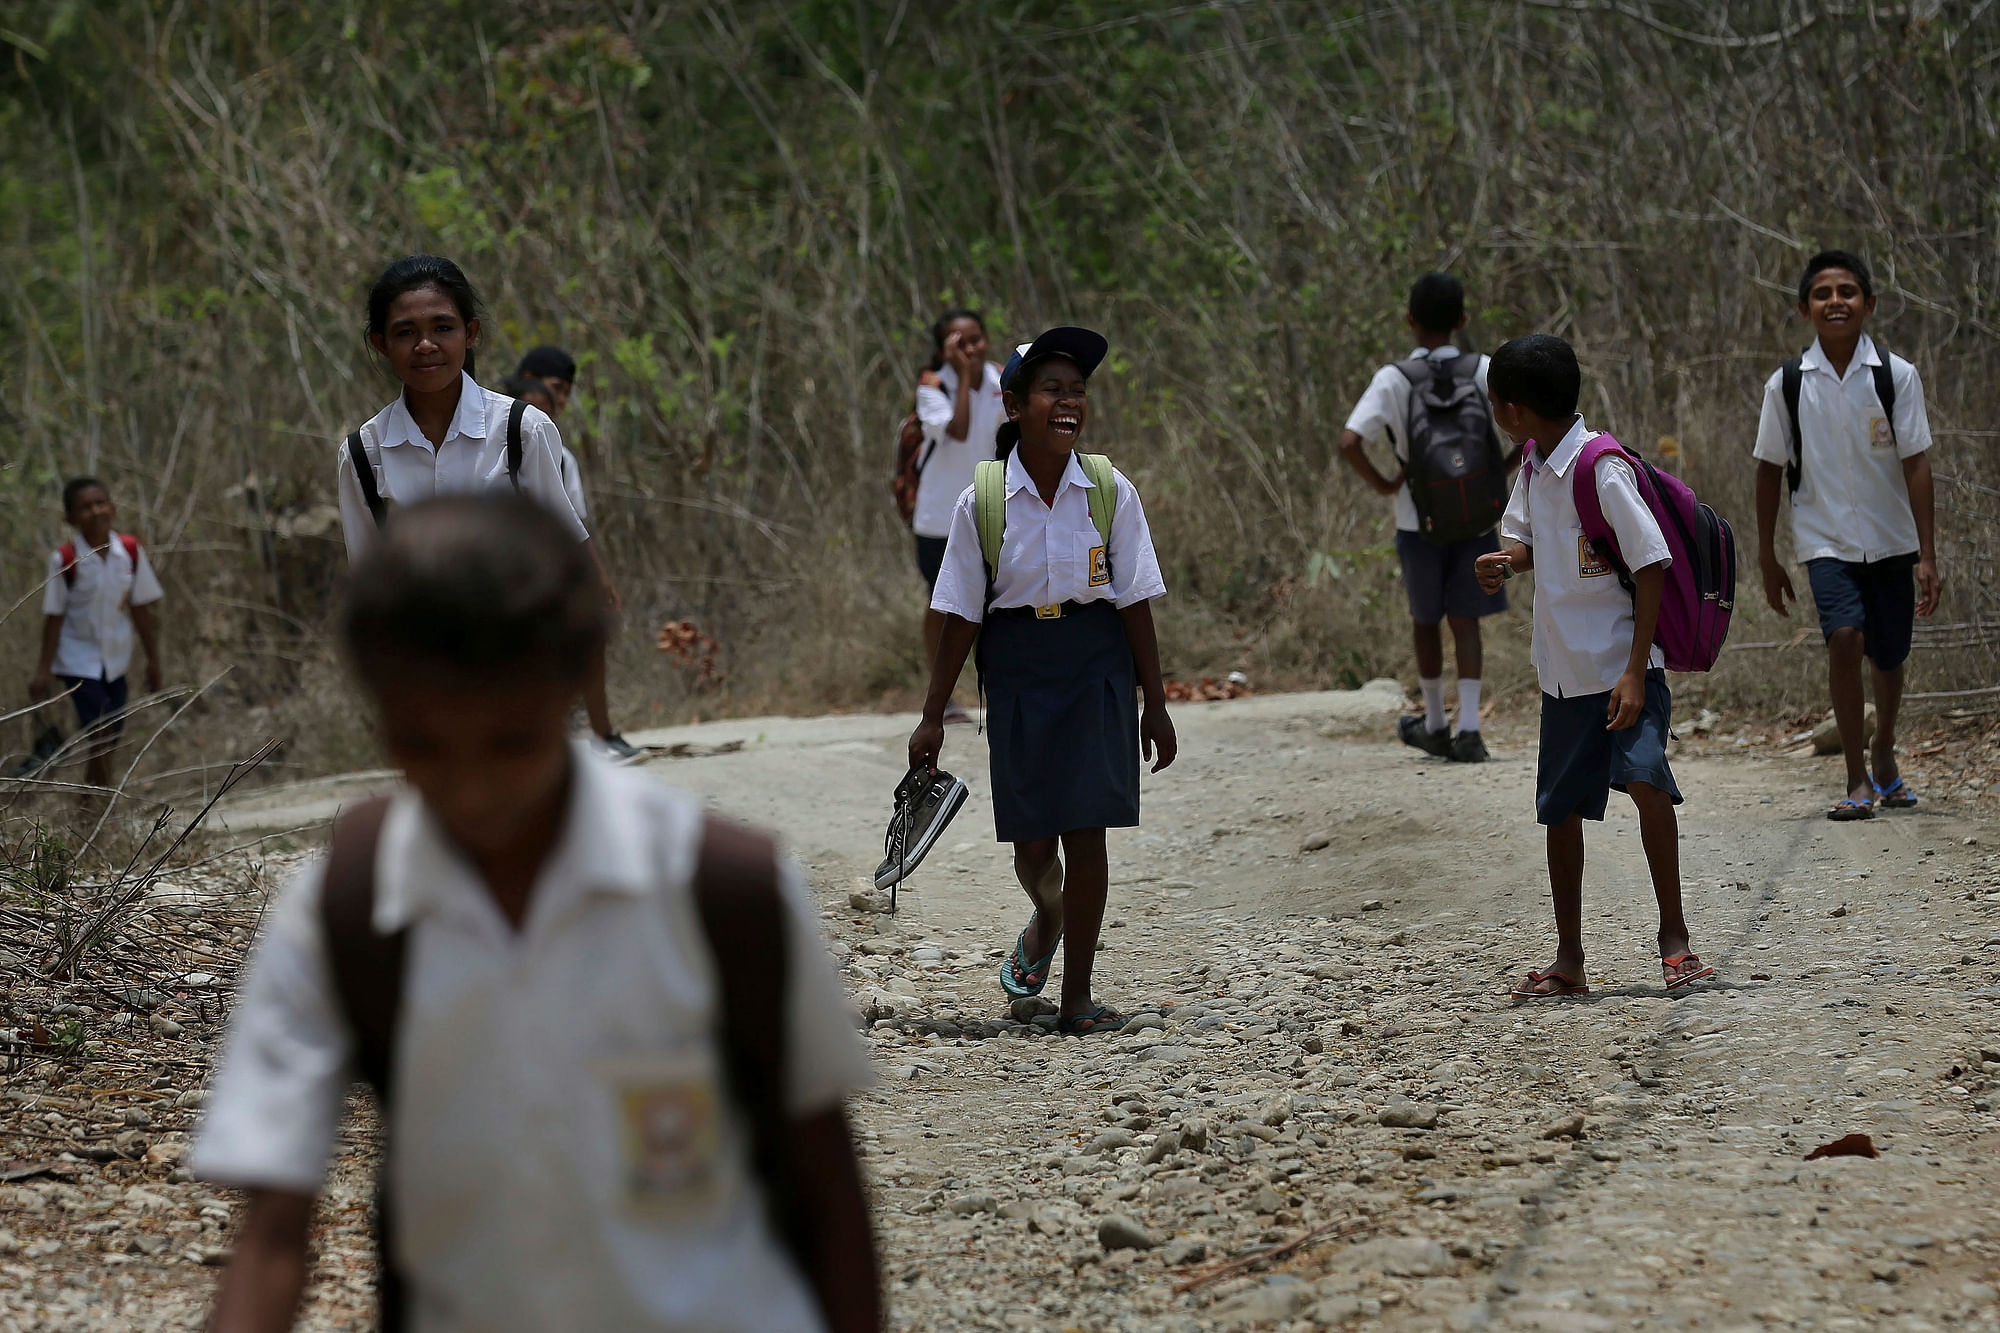  Students walk on a dirt road after school in West Timor, Indonesia. Children in this impoverished region of Indonesia often must walk long distances to school.